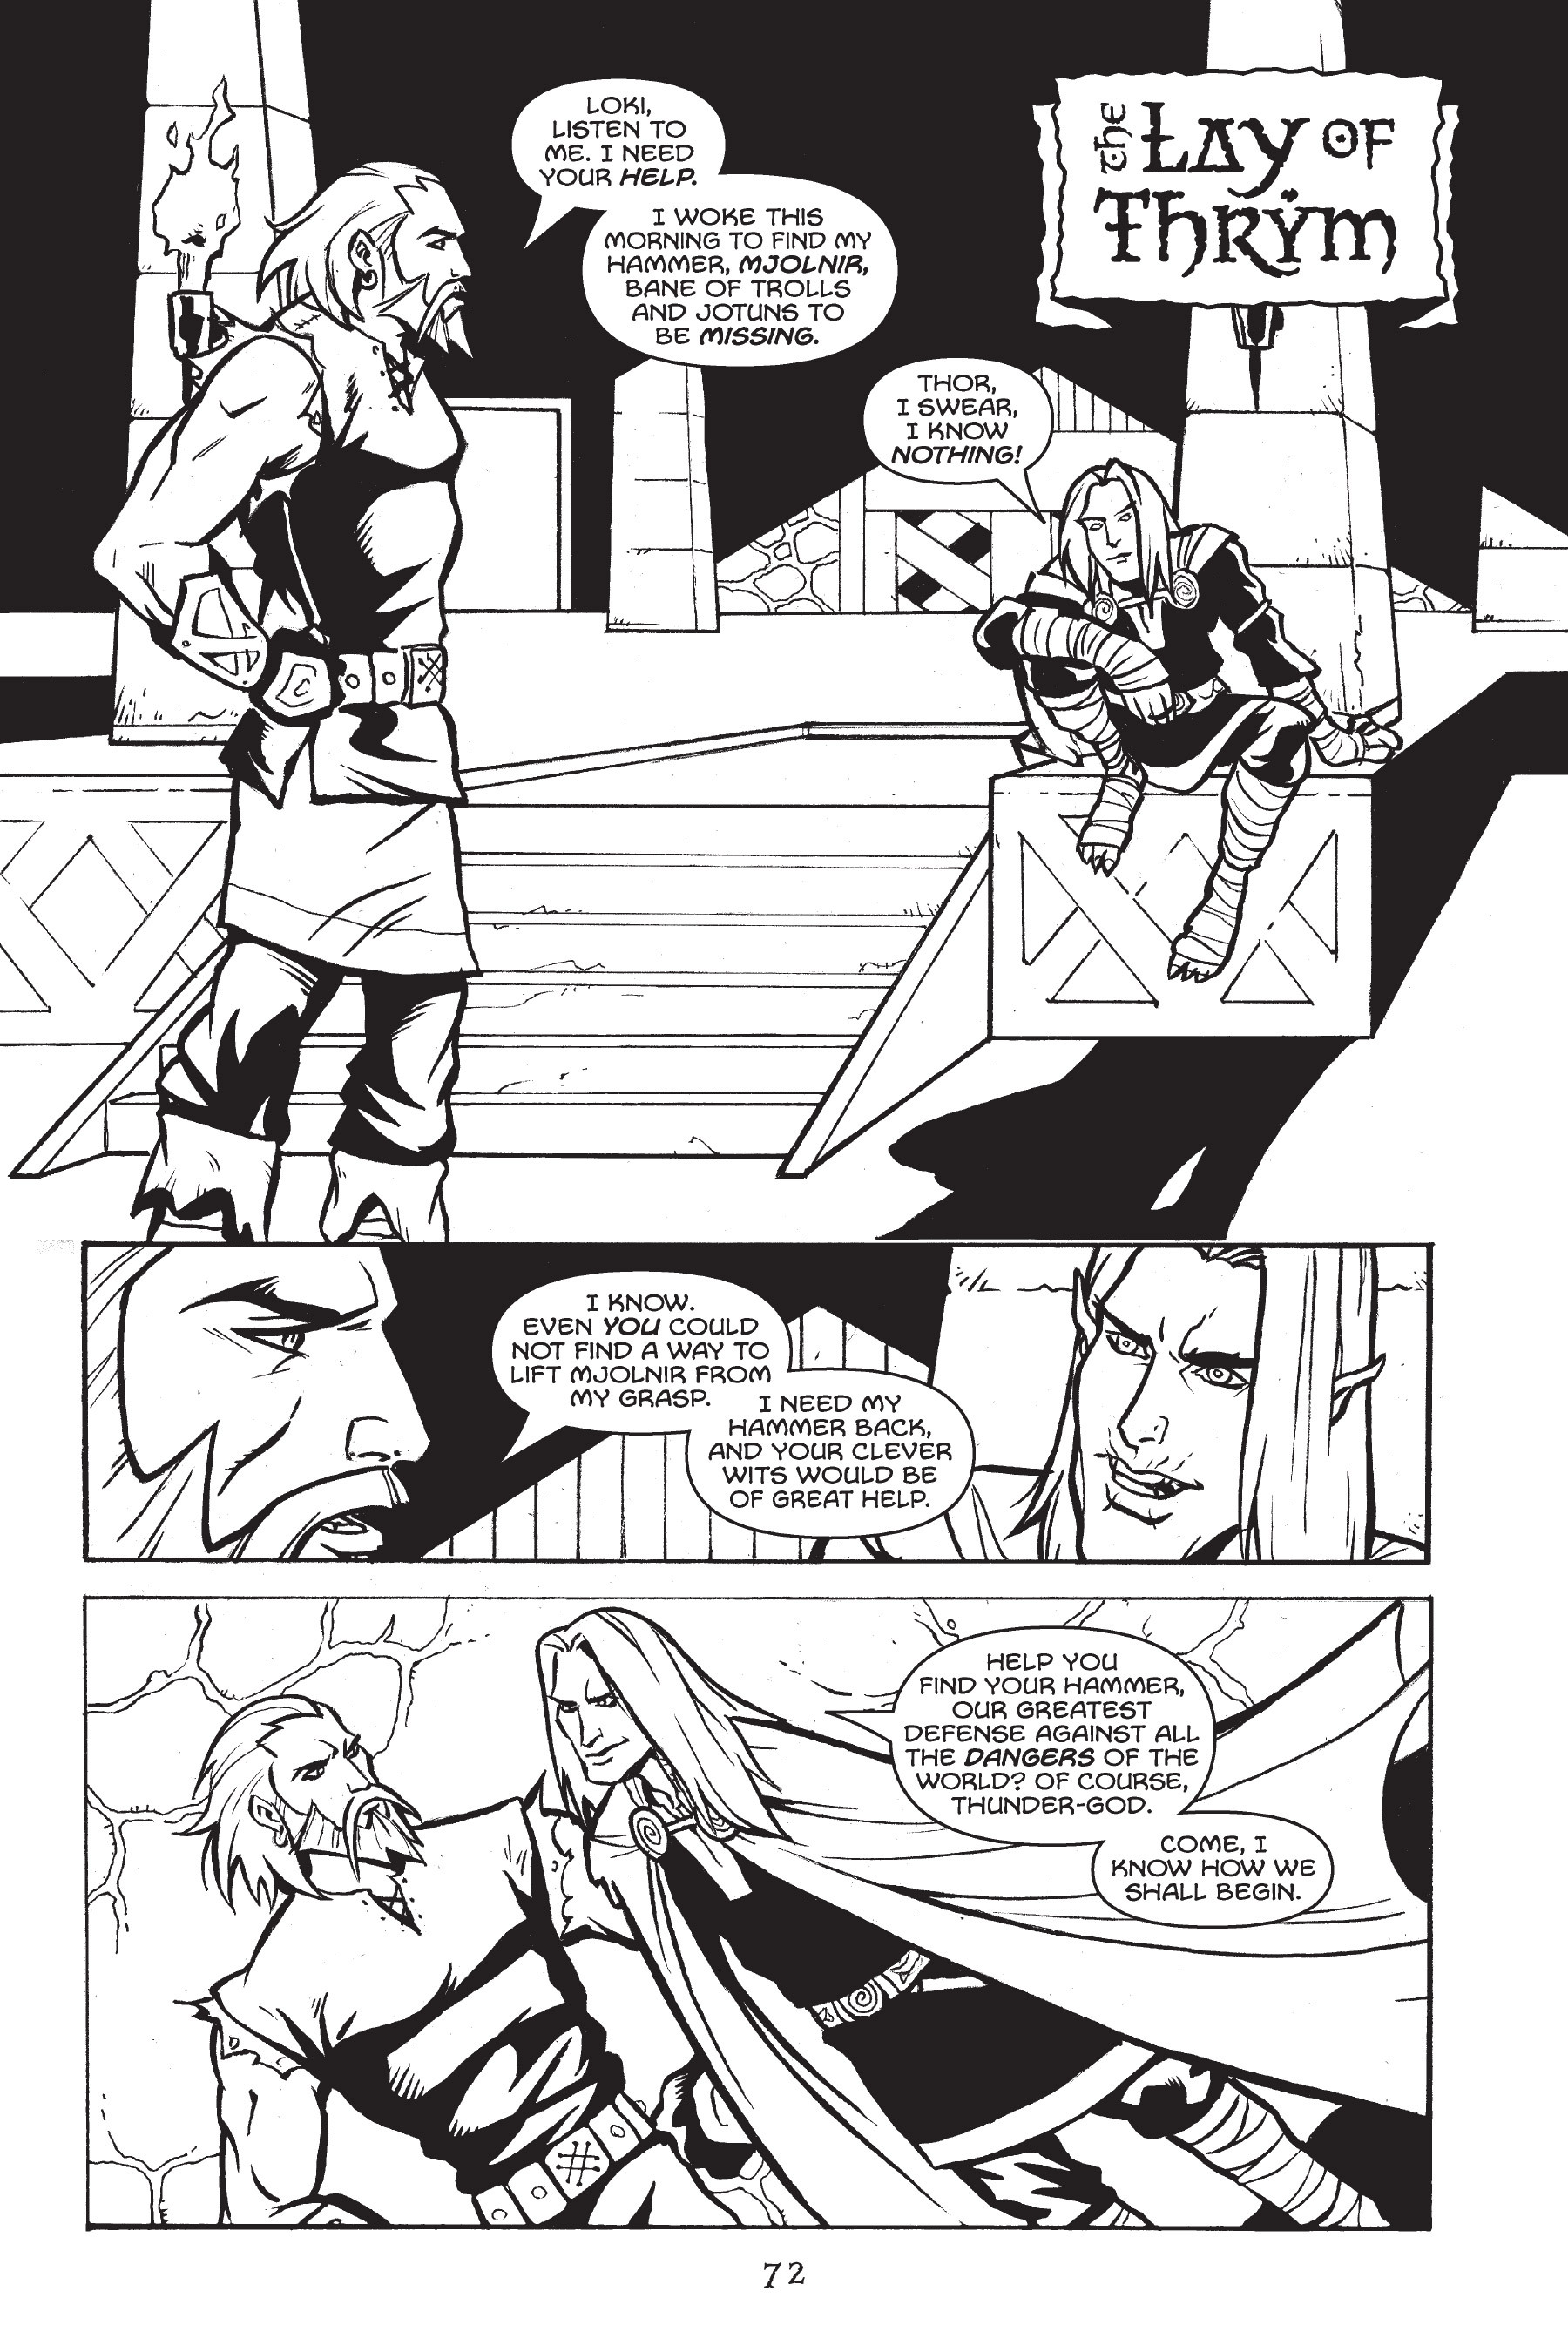 Read online Gods of Asgard comic -  Issue # TPB (Part 1) - 73